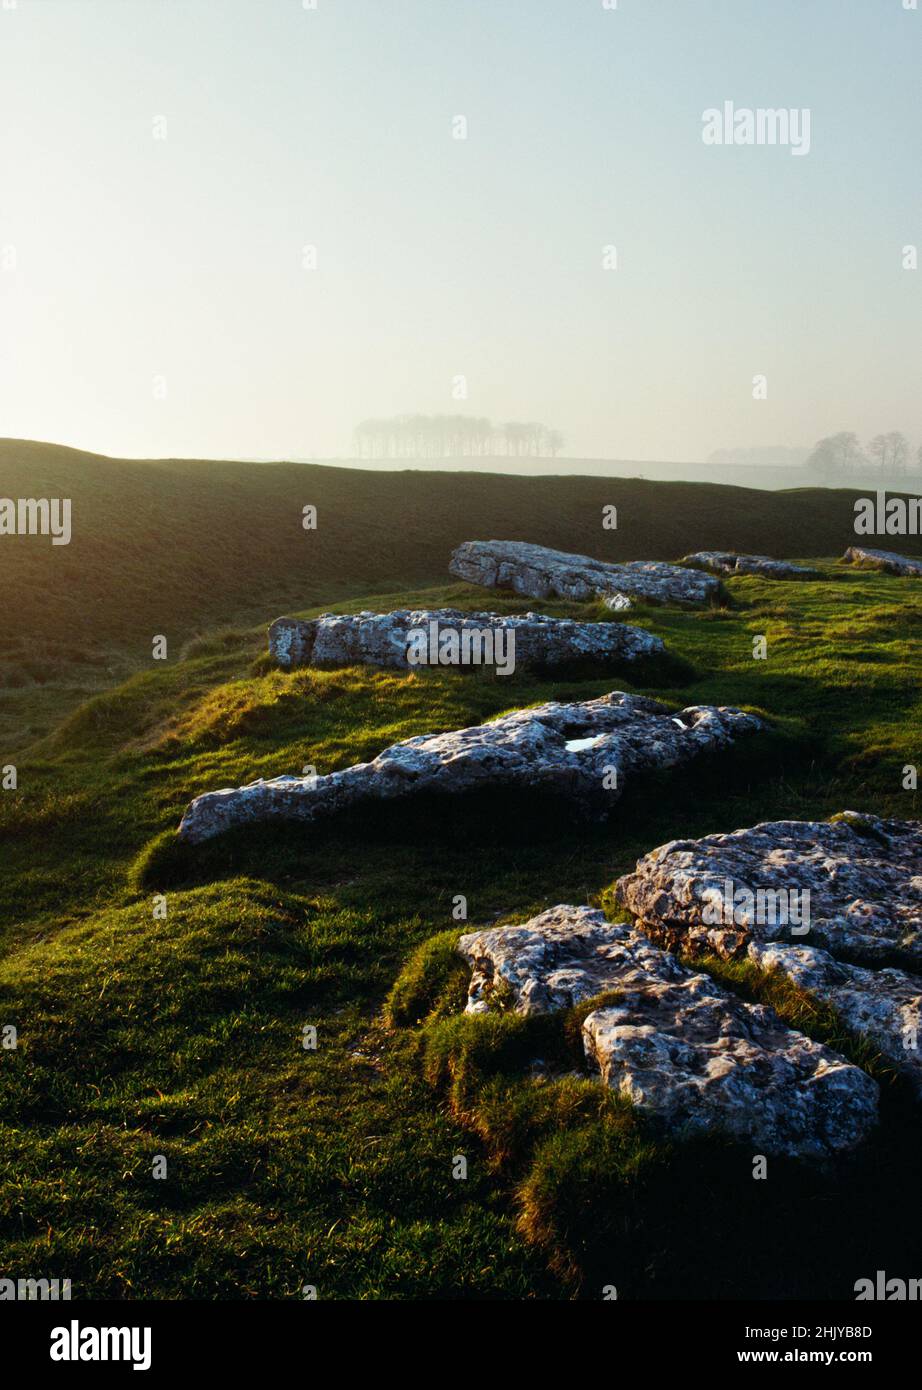 View NW inside Arbor Low circle-henge, Derbyshire: an oval setting of recumbent limestone slabs within the ditch & bank of a Neolithic henge monument. Stock Photo